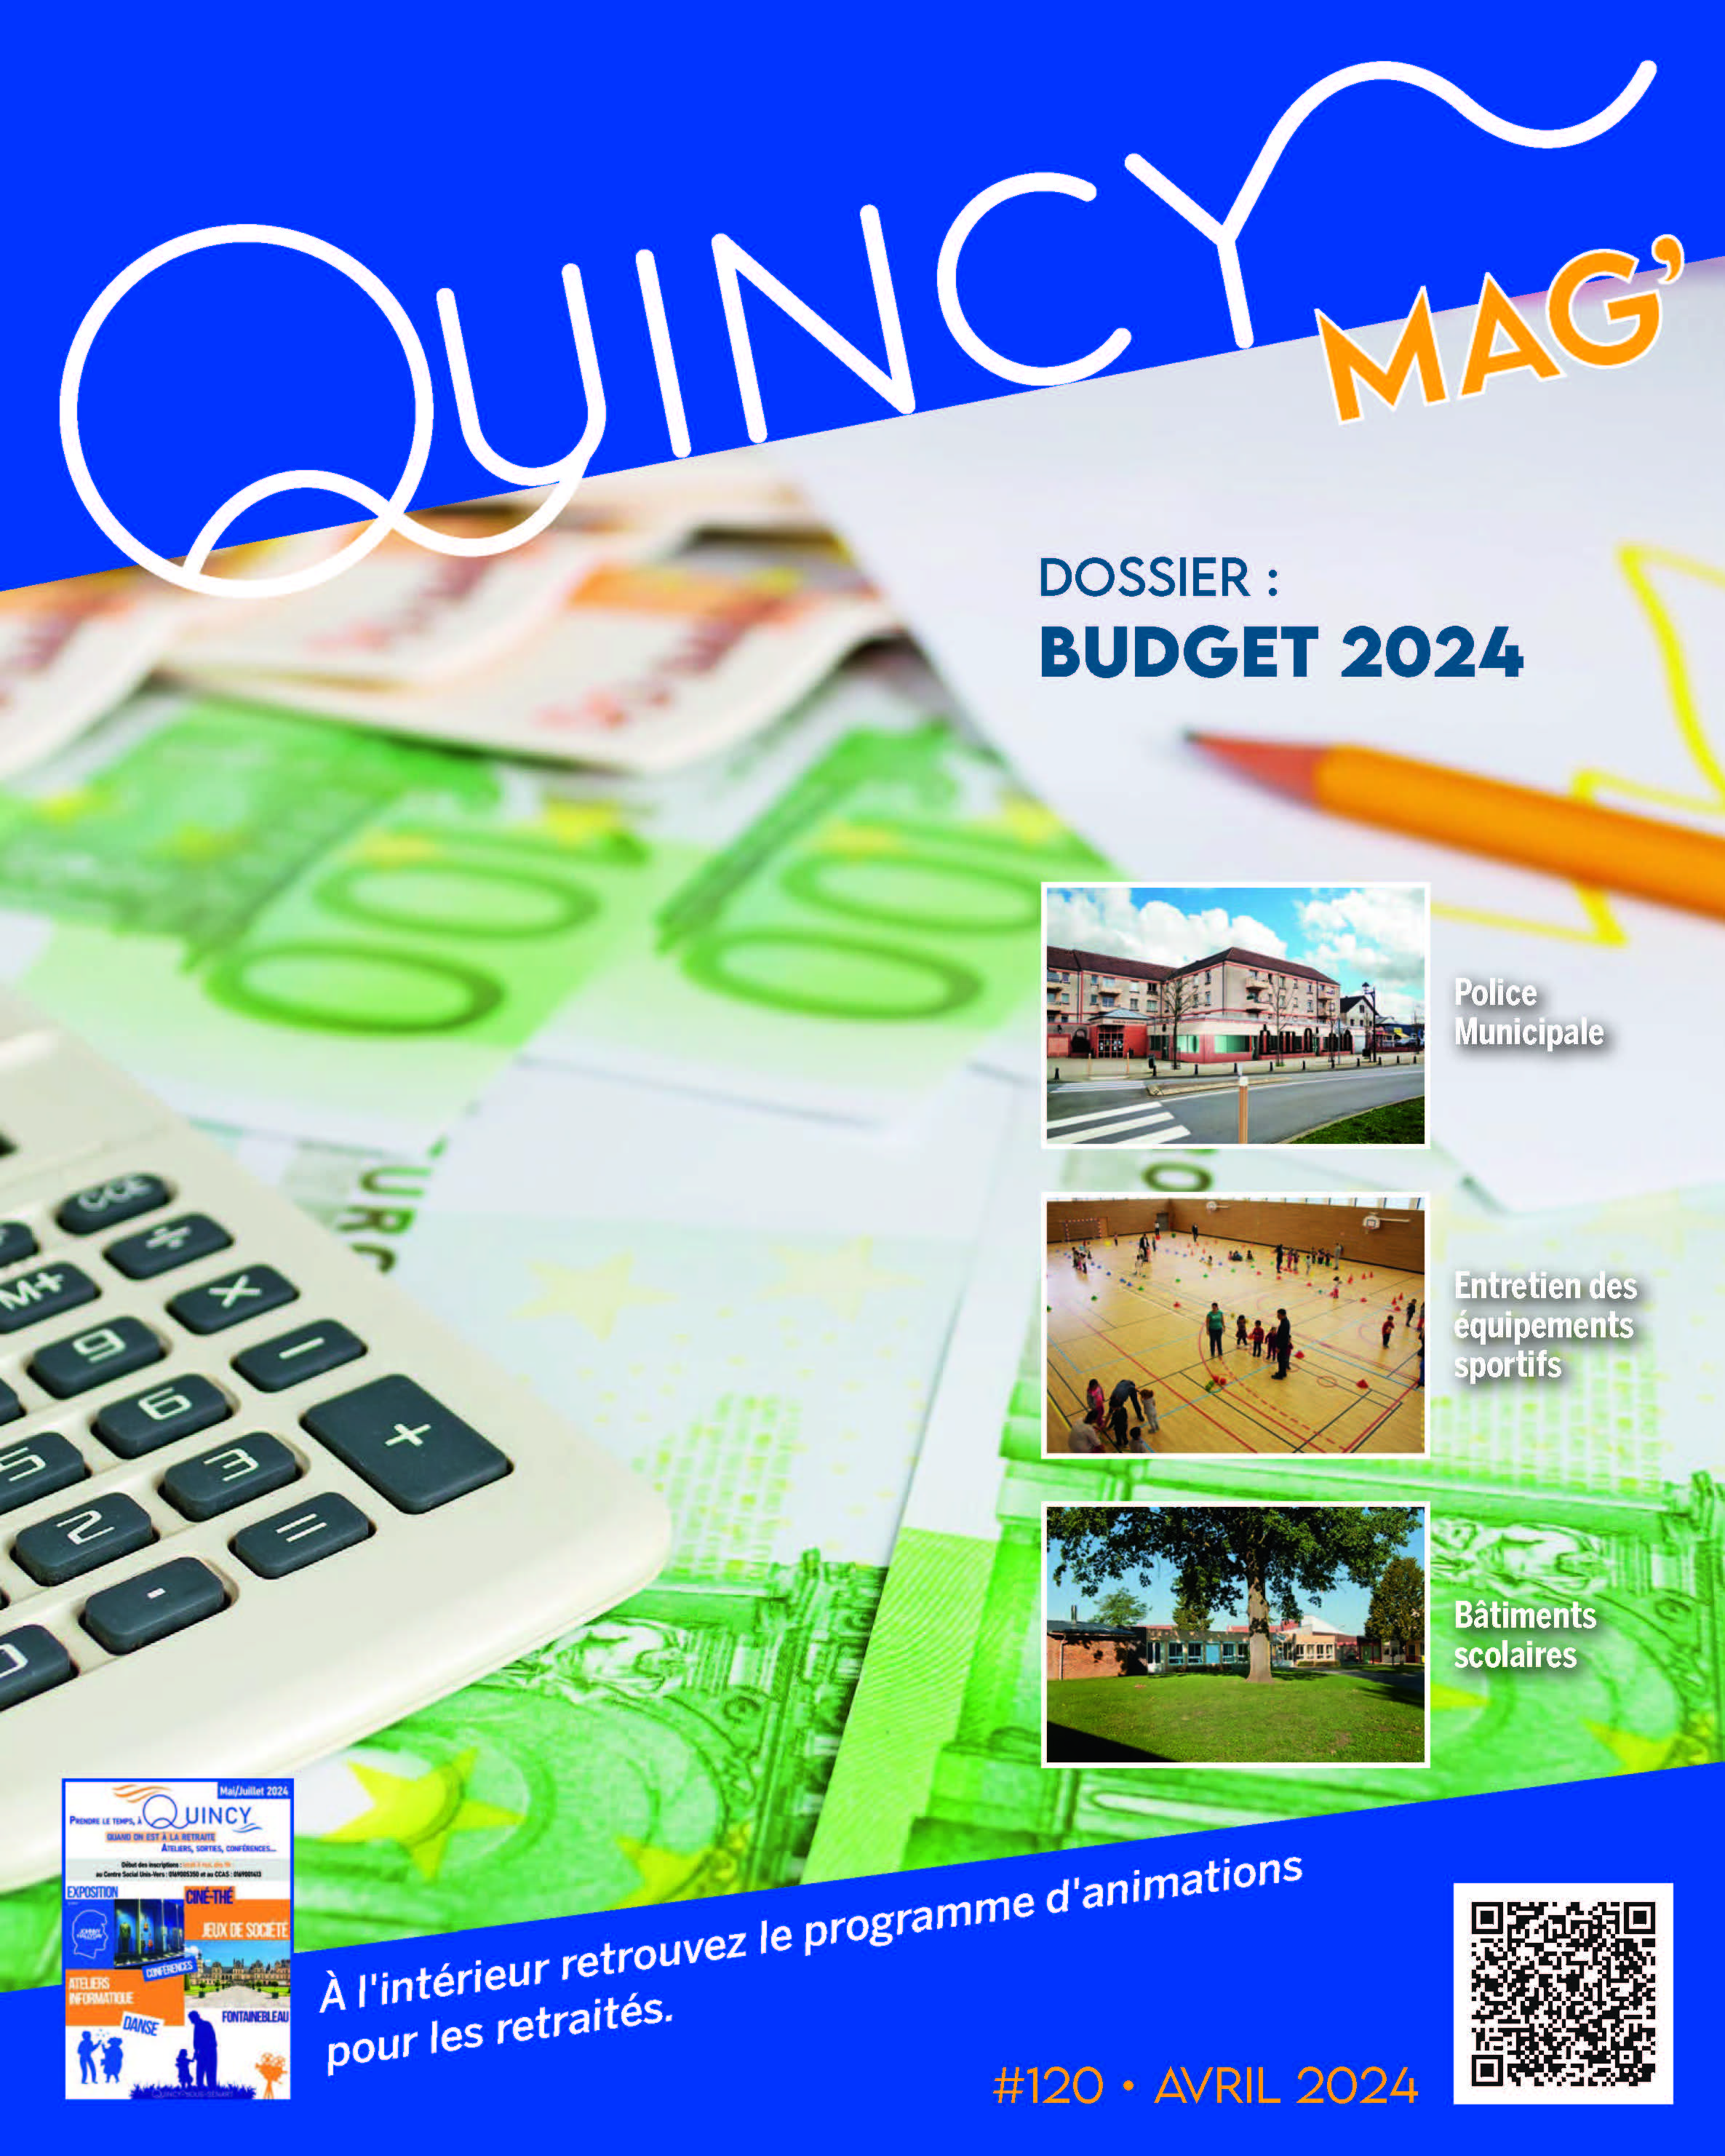 Quincy mag 120 - avril 2024 - Couverture.jpg